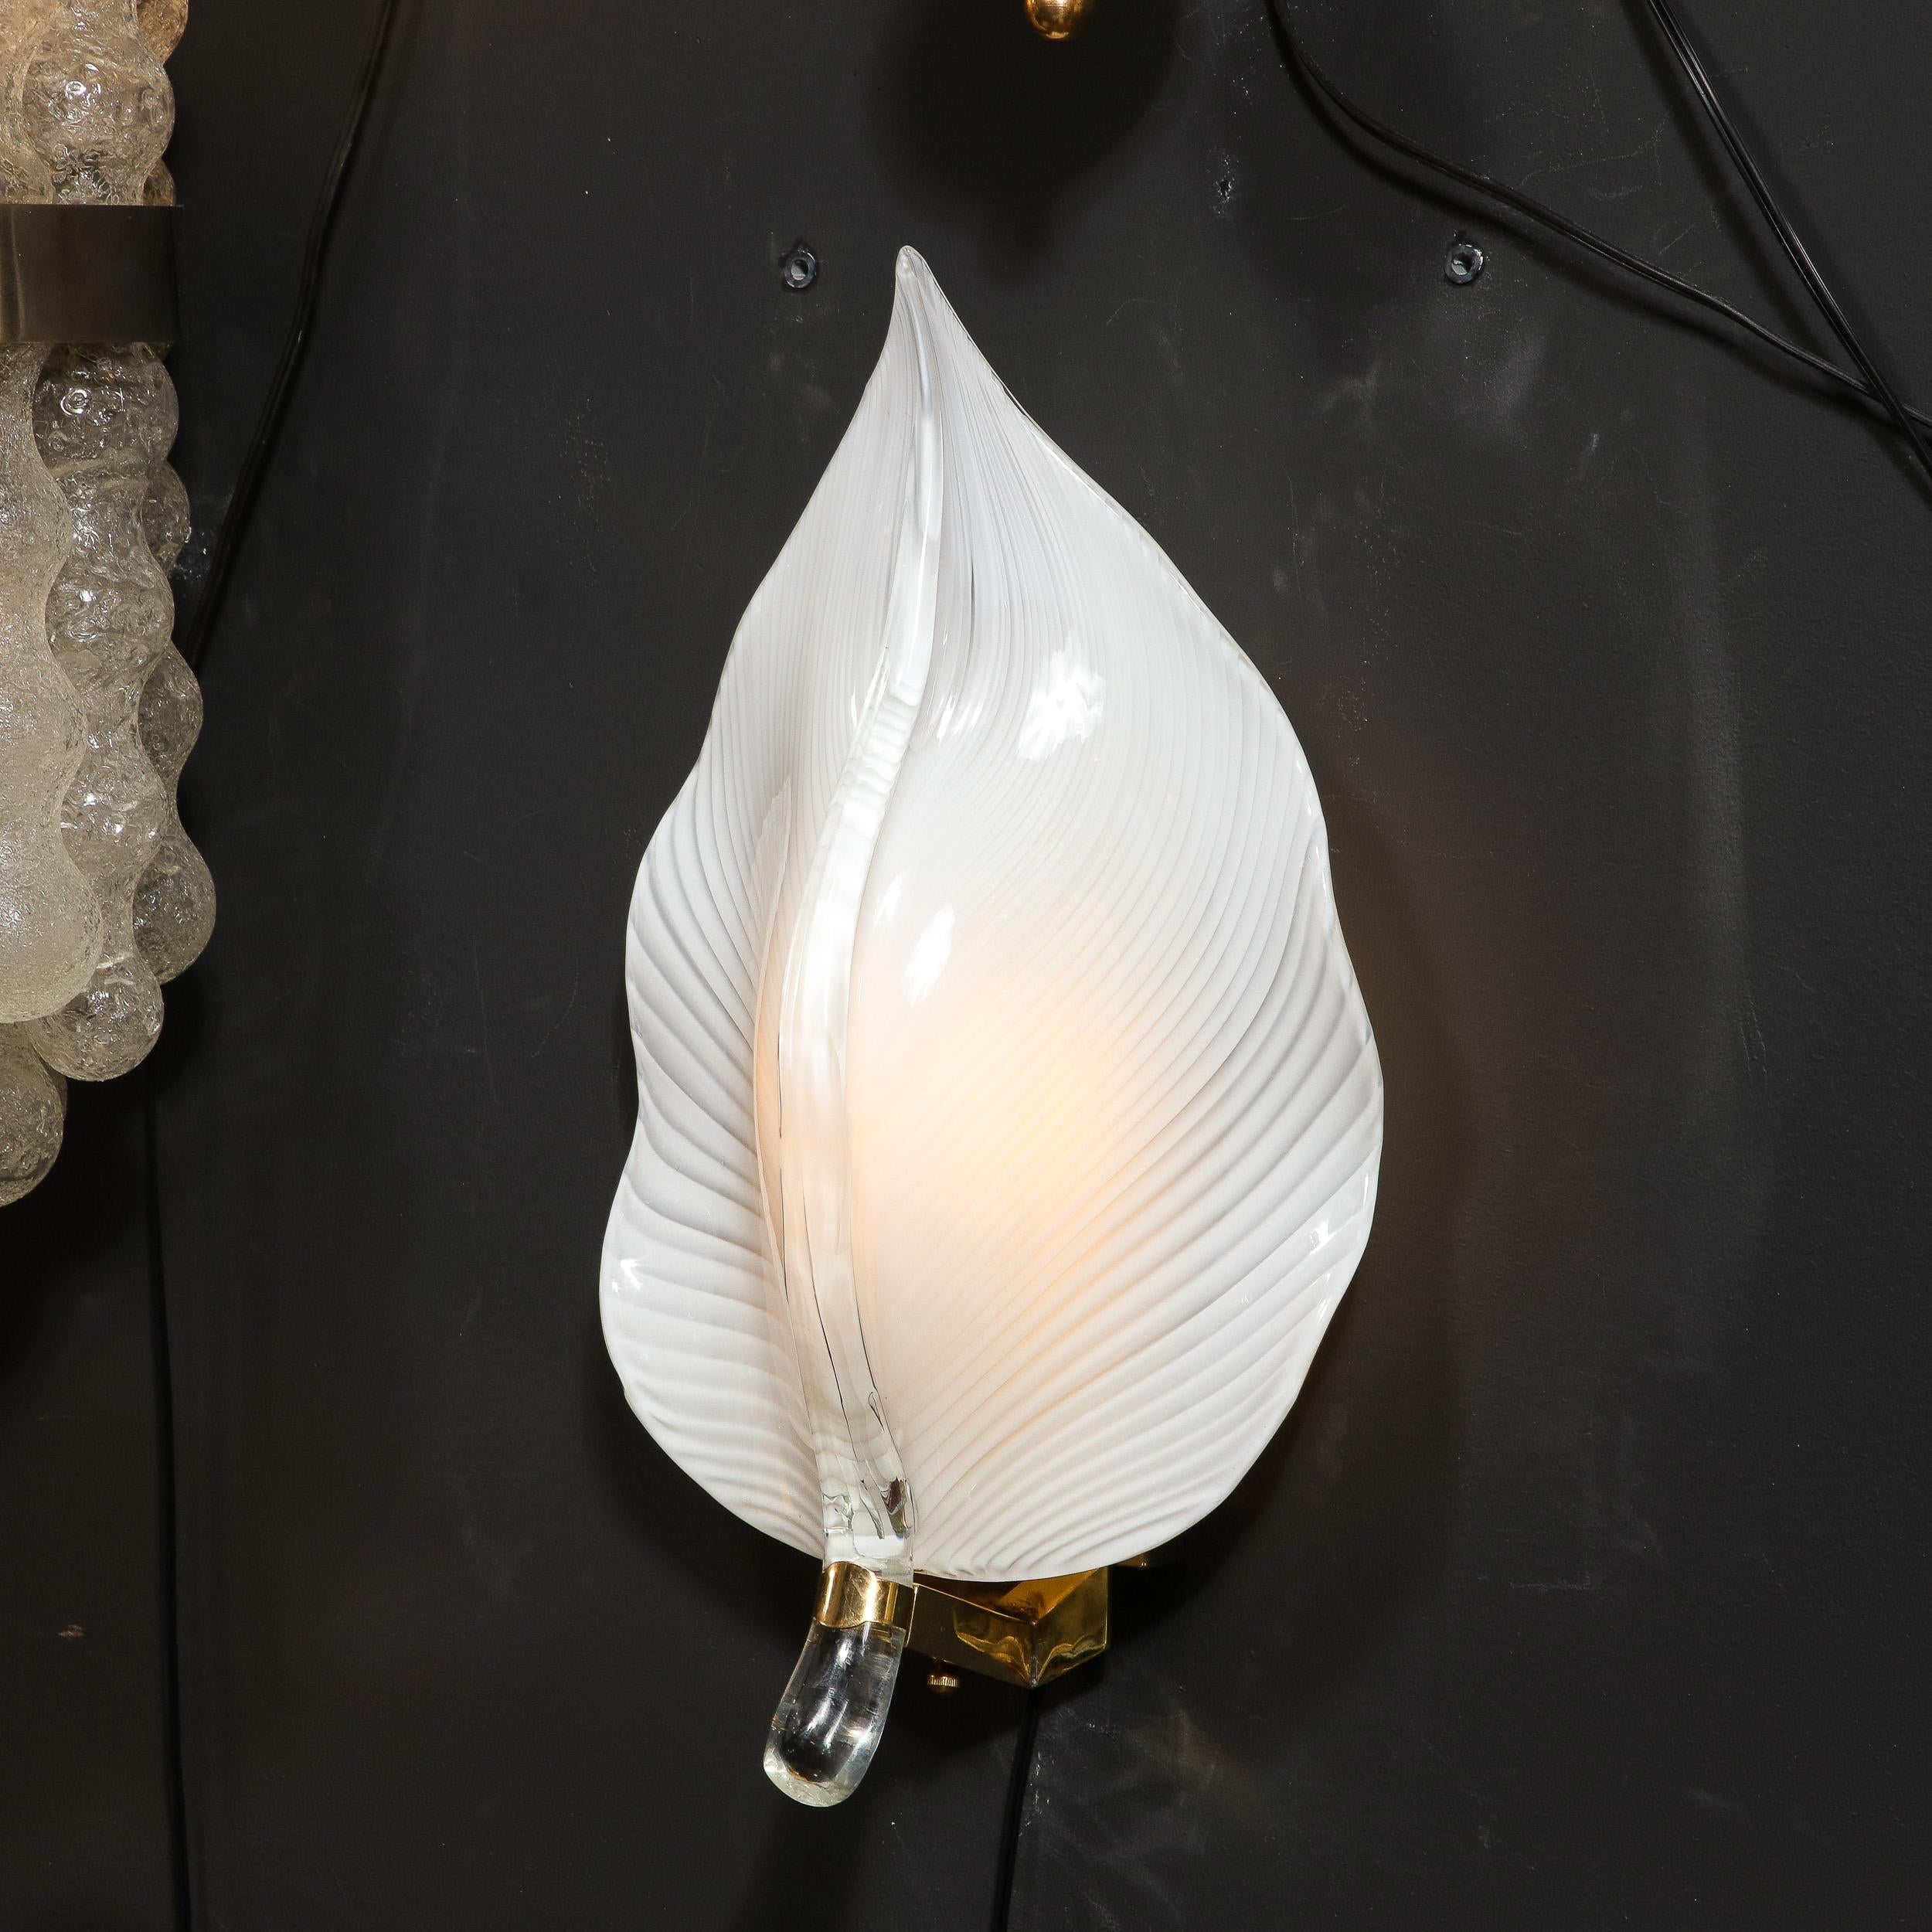 Late 20th Century Pair of Mid-Century Modernist Handblown Murano Glass Leaf Sconces by Franco Luce